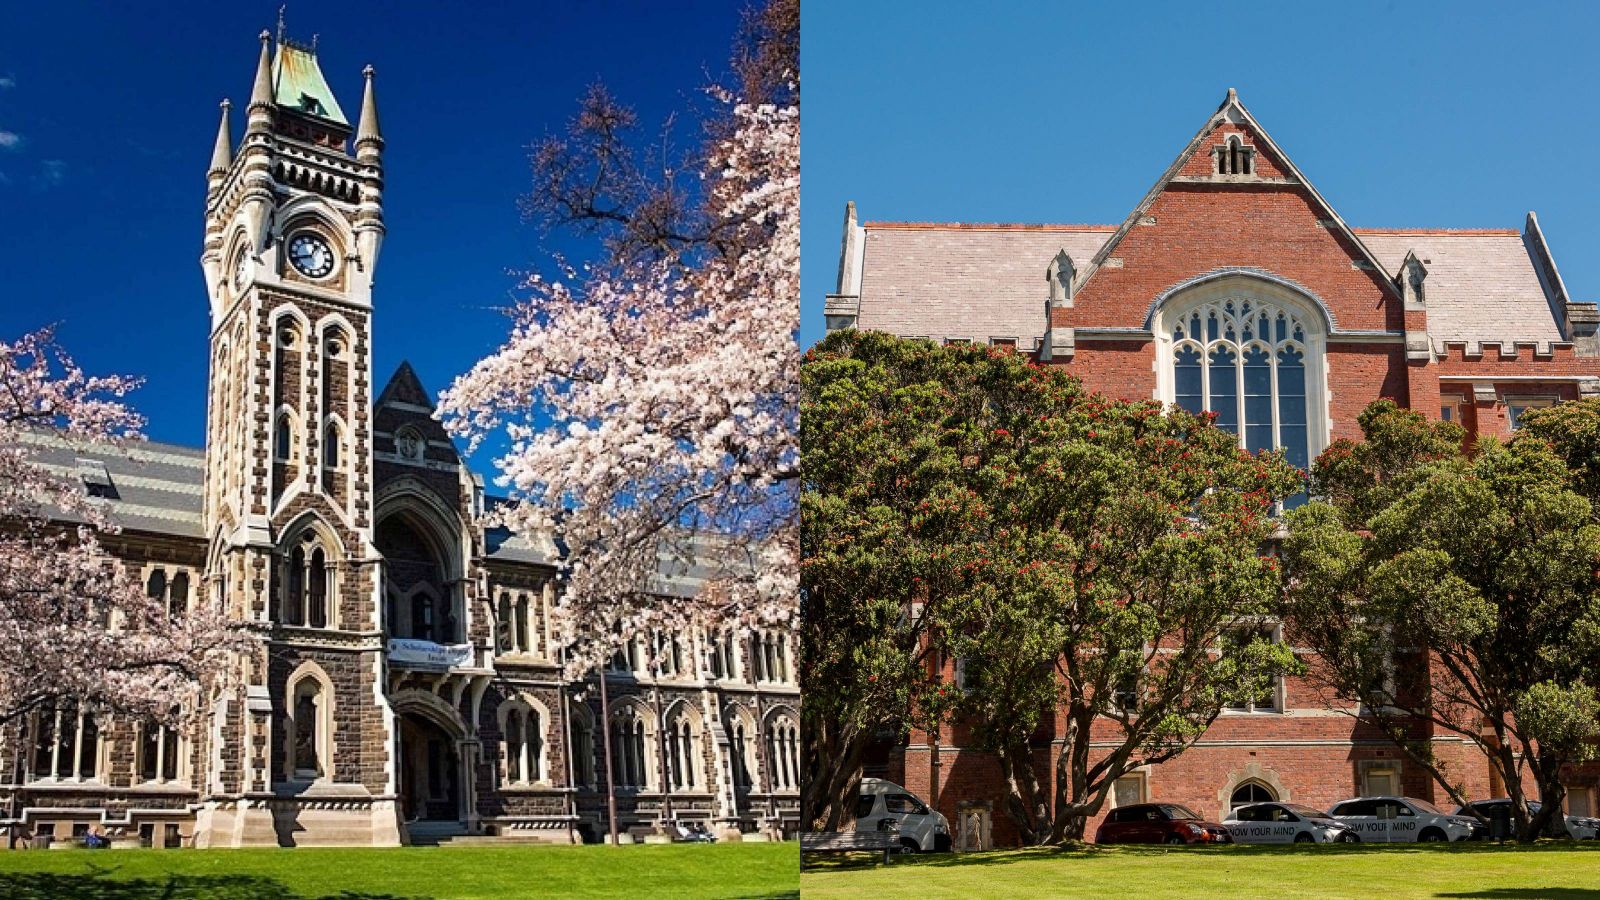 The Clocktower Building at the University of Otago and the Hunter Building at Victoria University of Wellington